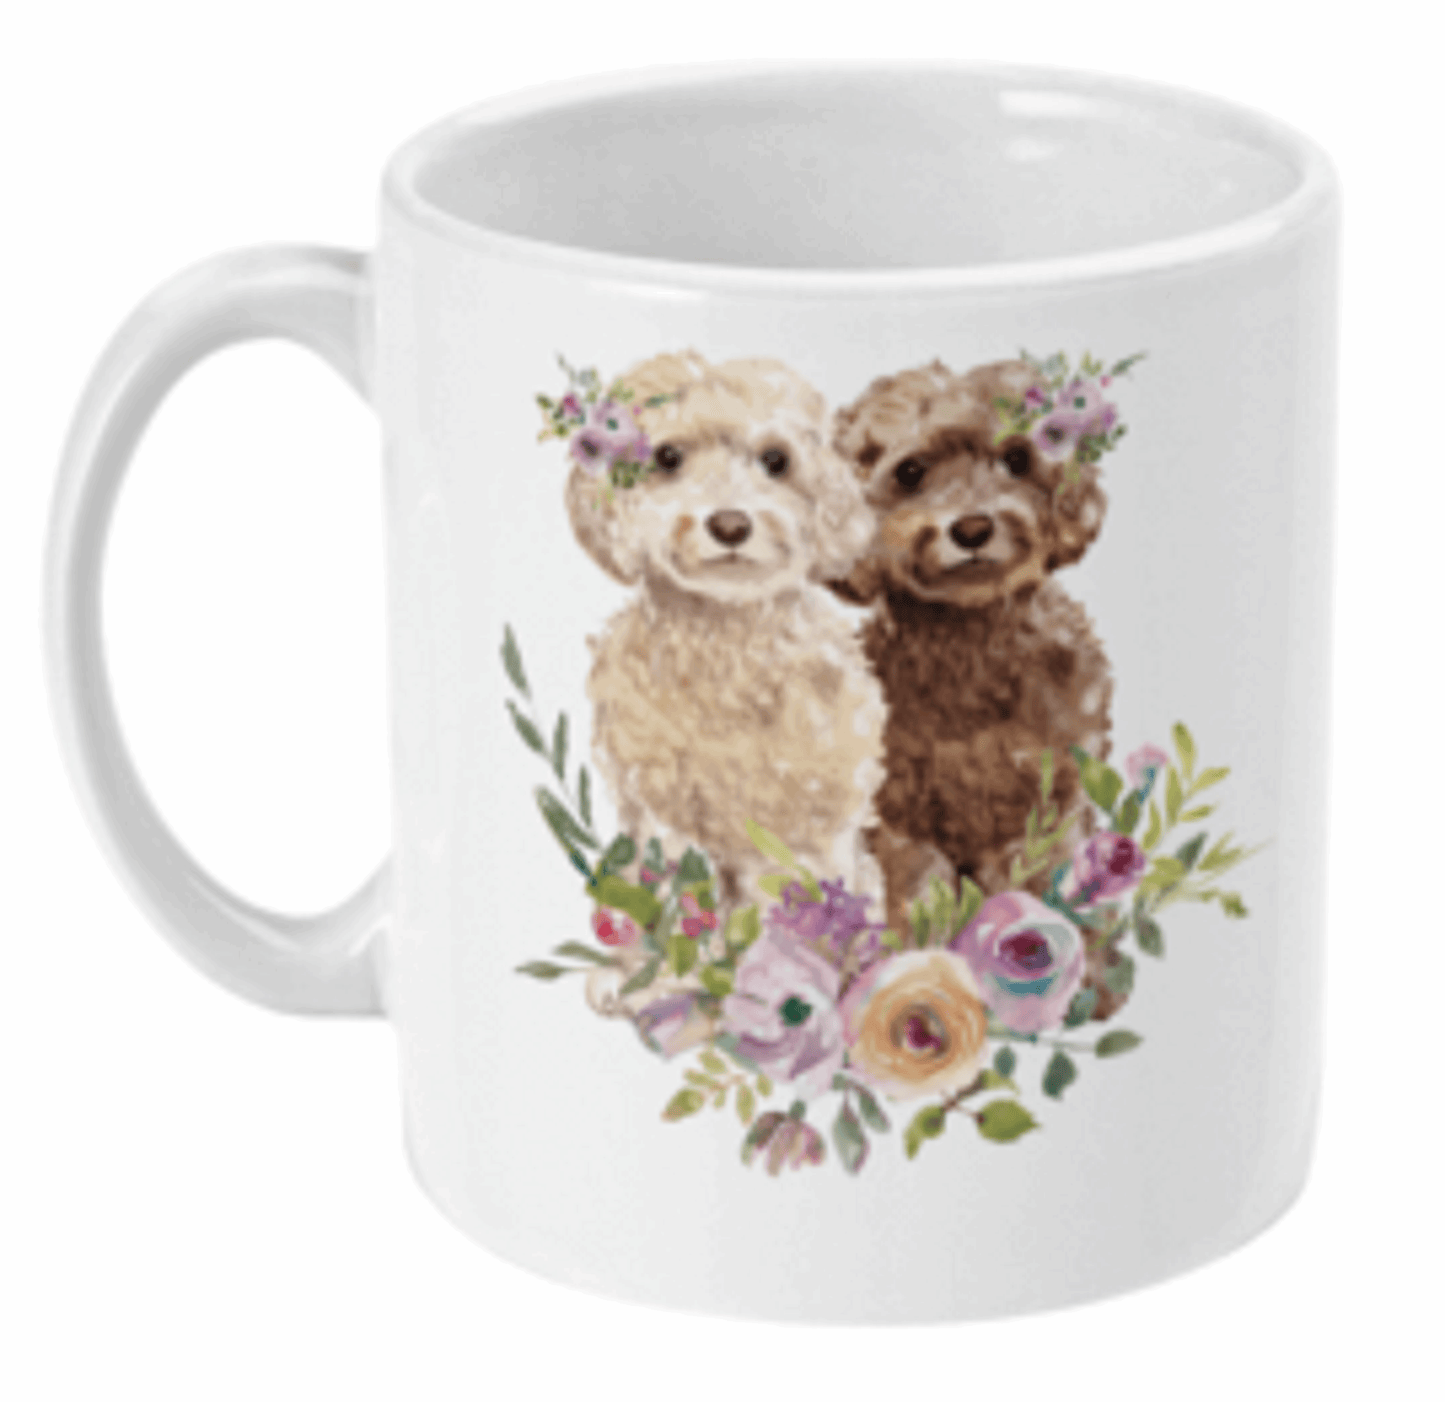  Goldendoodle And Labradoodle Mug by Free Spirit Accessories sold by Free Spirit Accessories